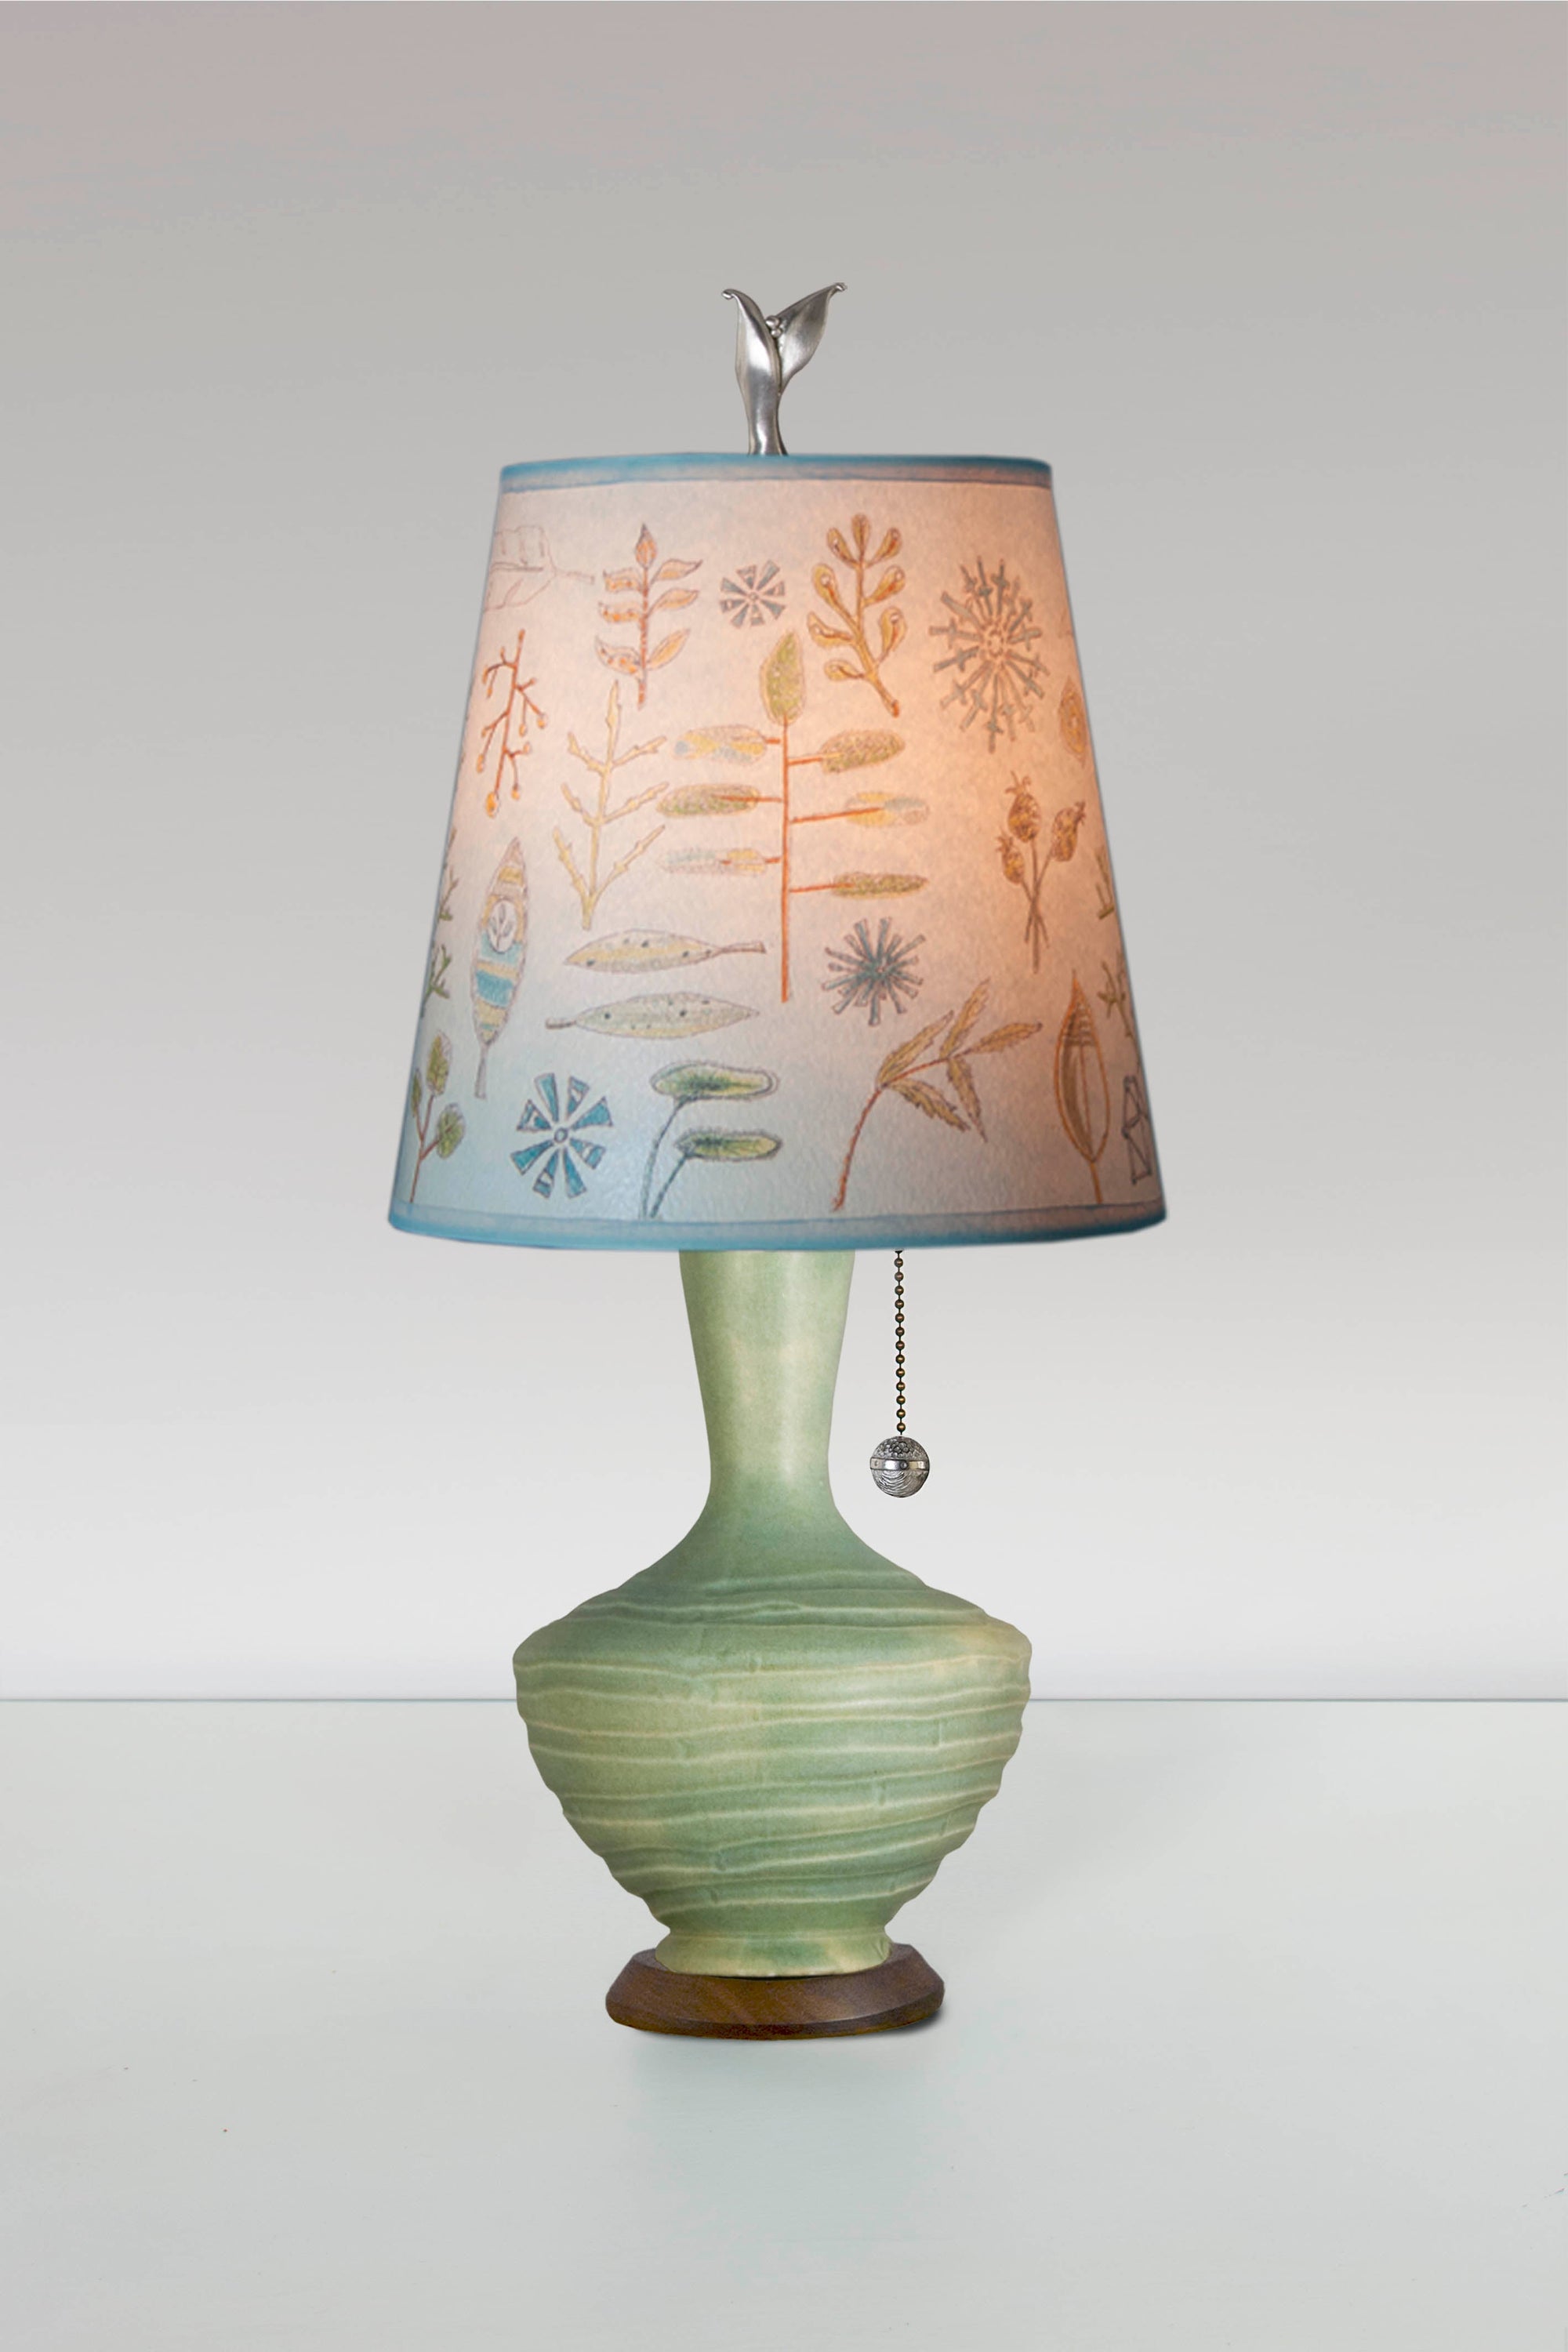 Janna Ugone & Co Table Lamp Ceramic Table Lamp in Old Copper with Small Drum Shade in Field Chart